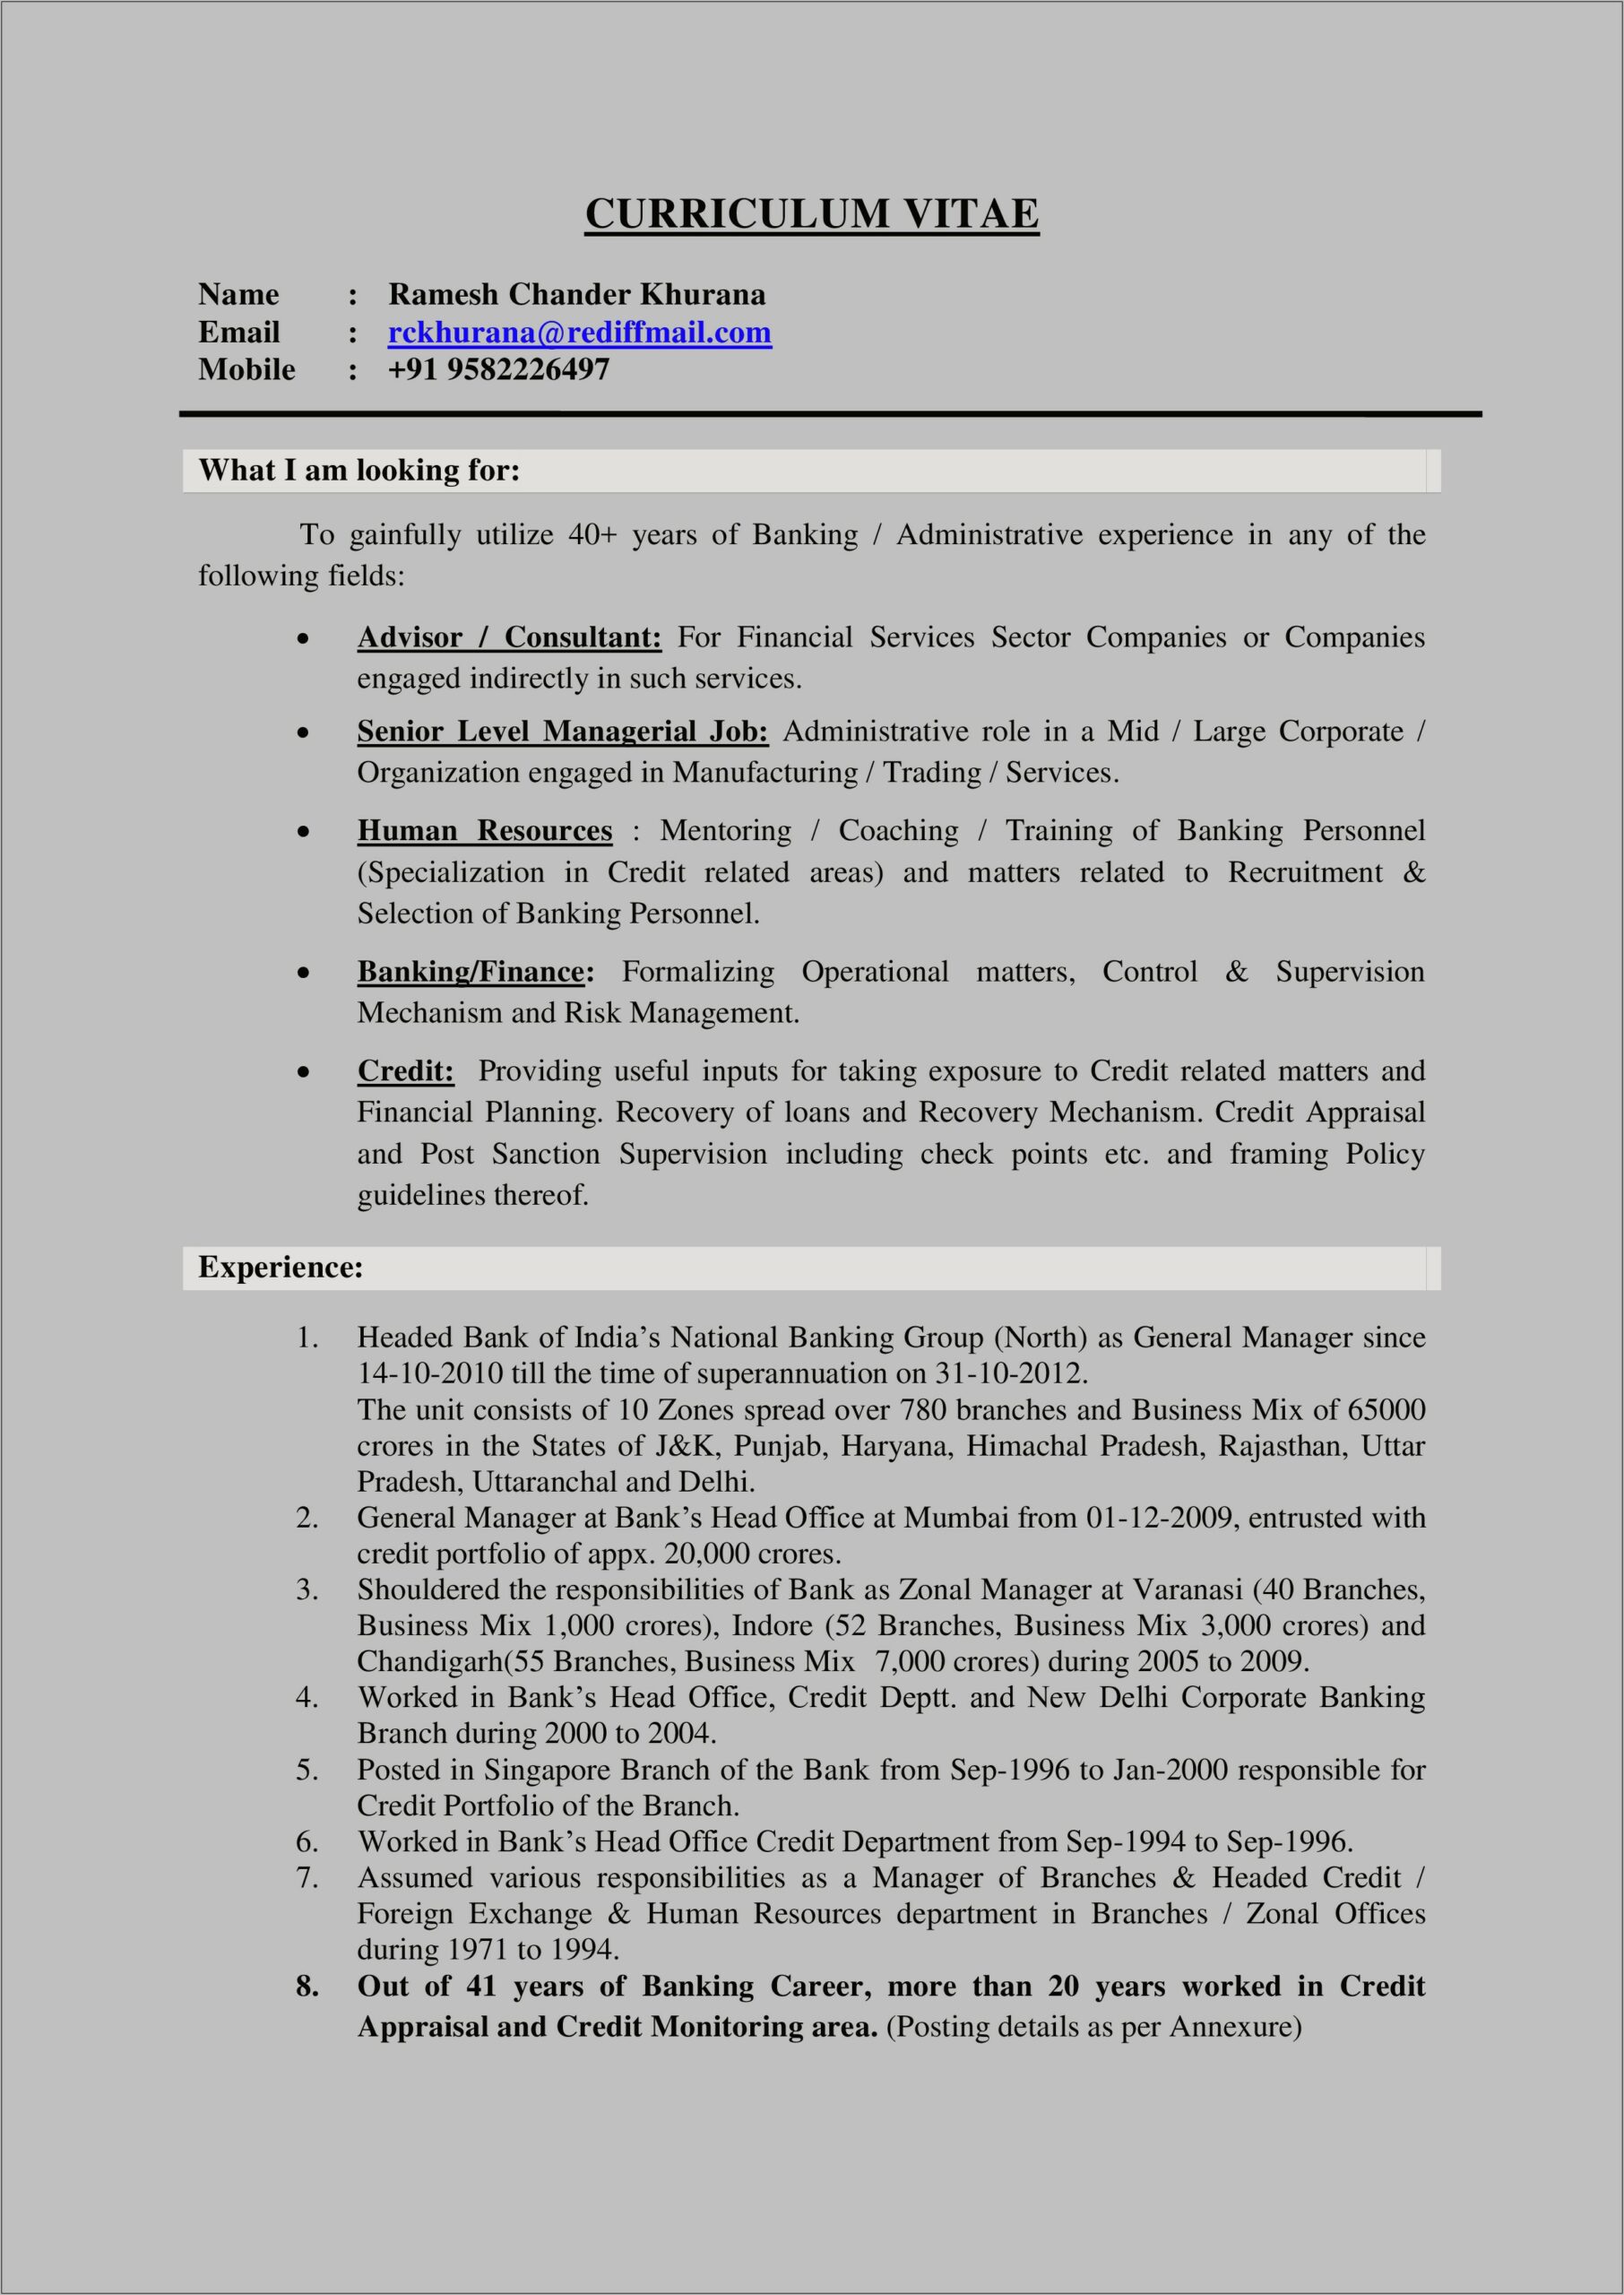 Sample Resume For Corporate Finance Analyst